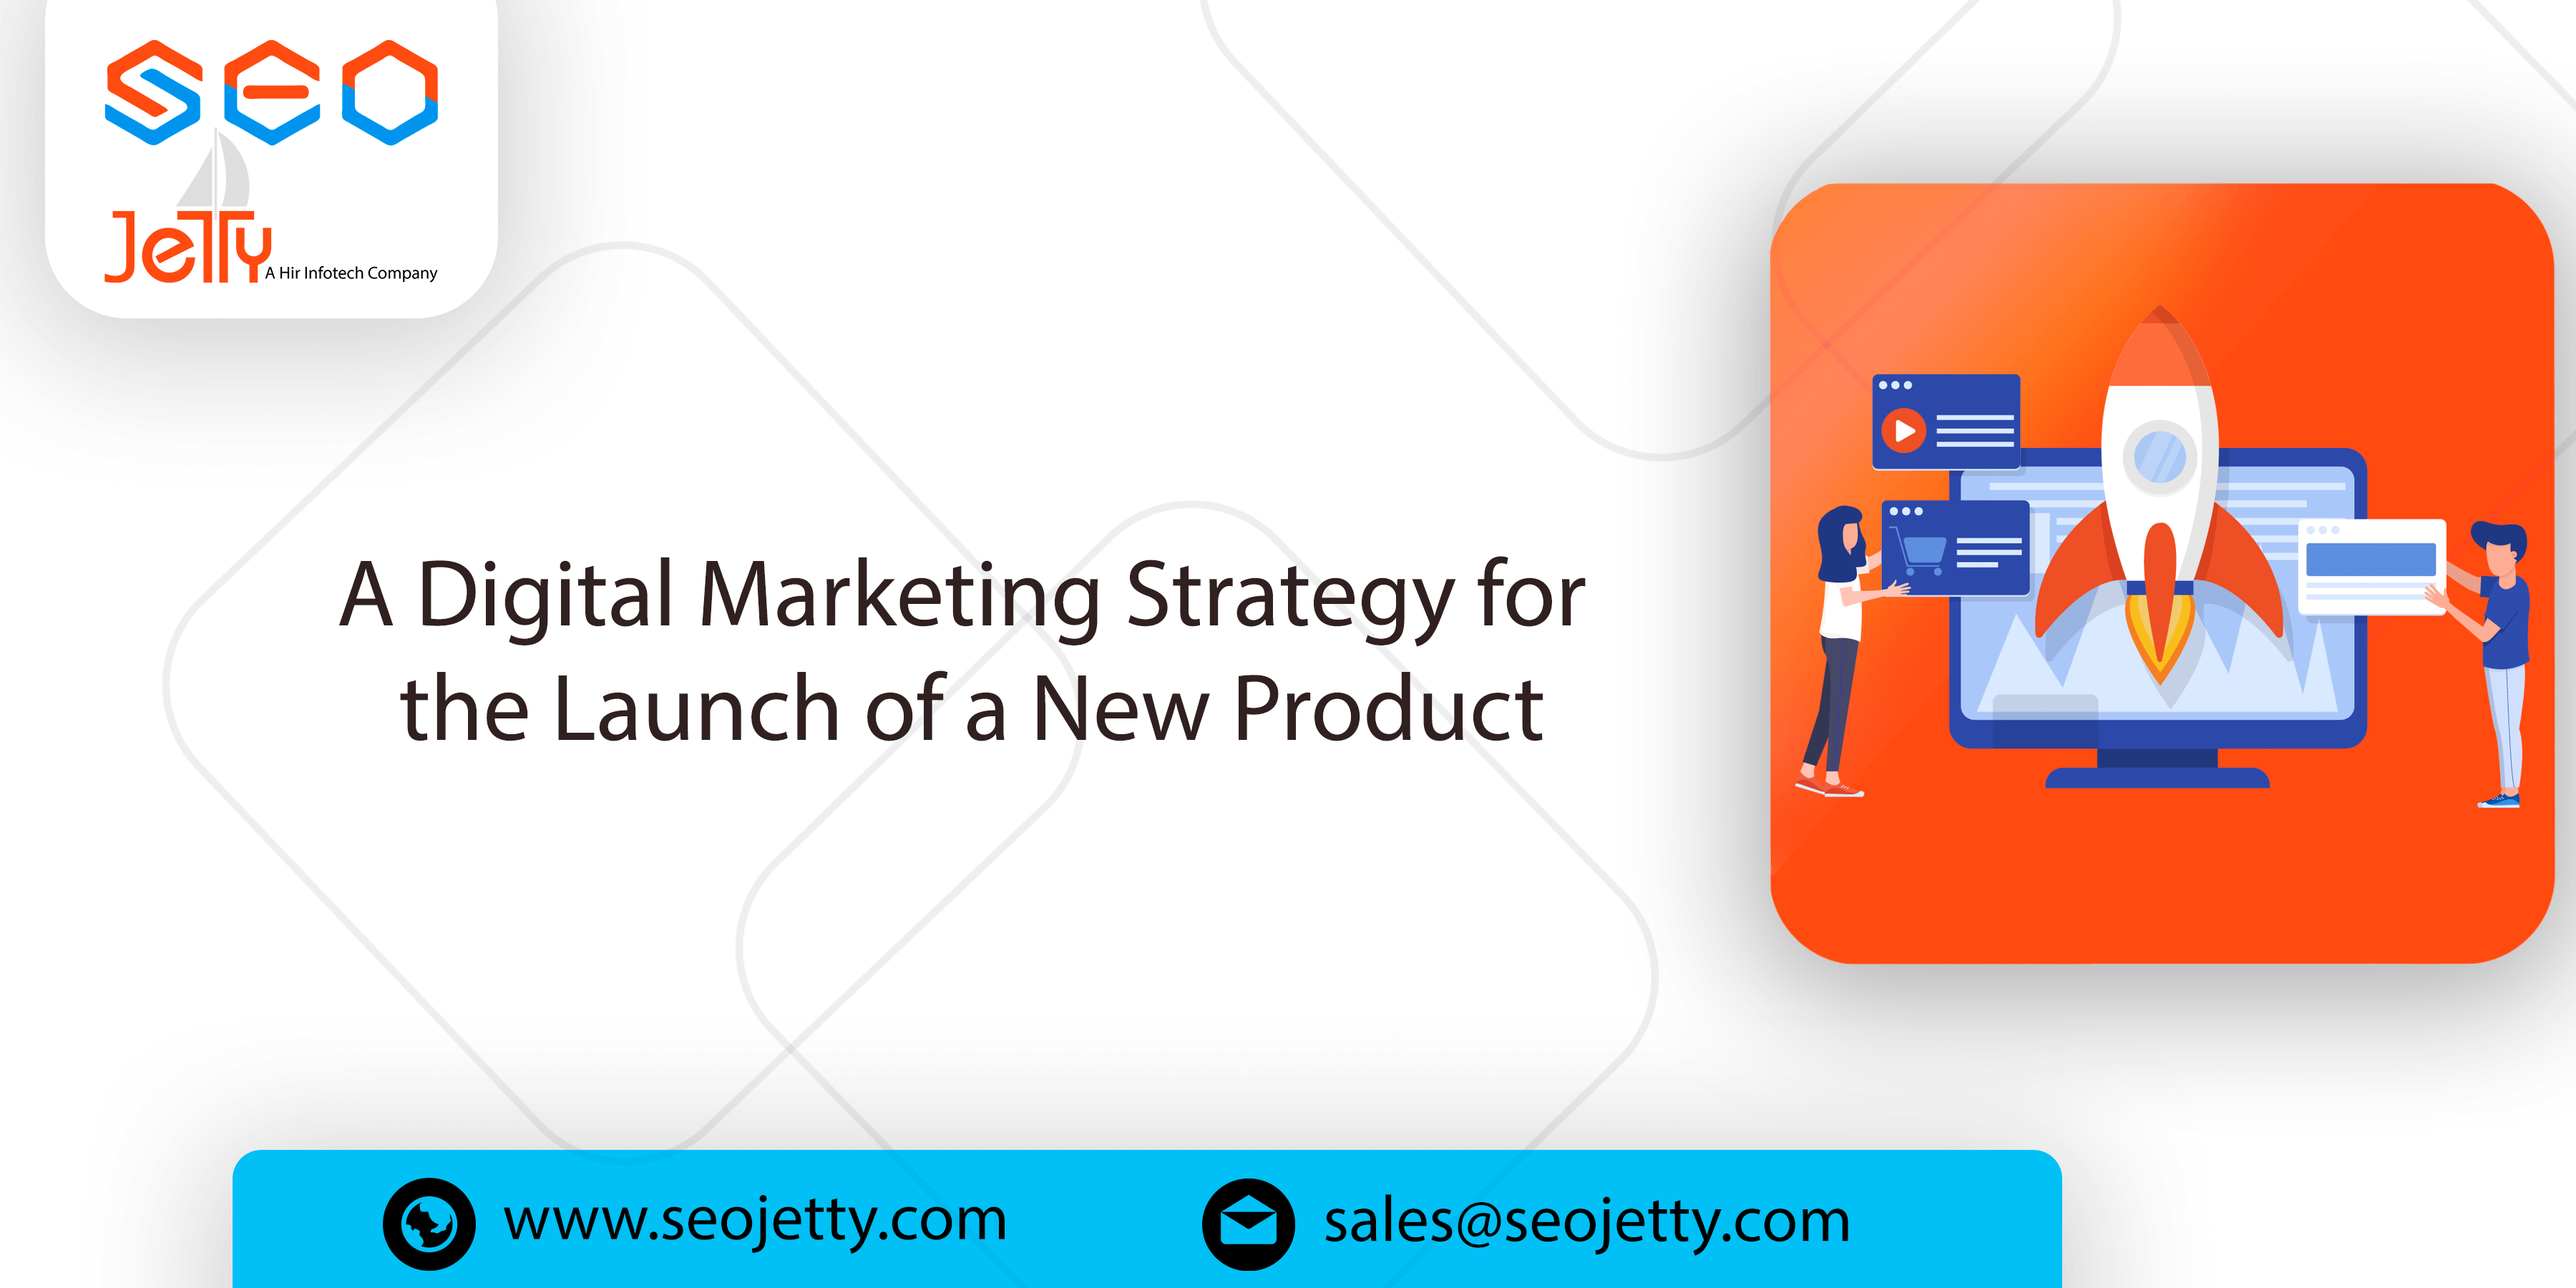 A Digital Marketing Strategy for the Launch of a New Product